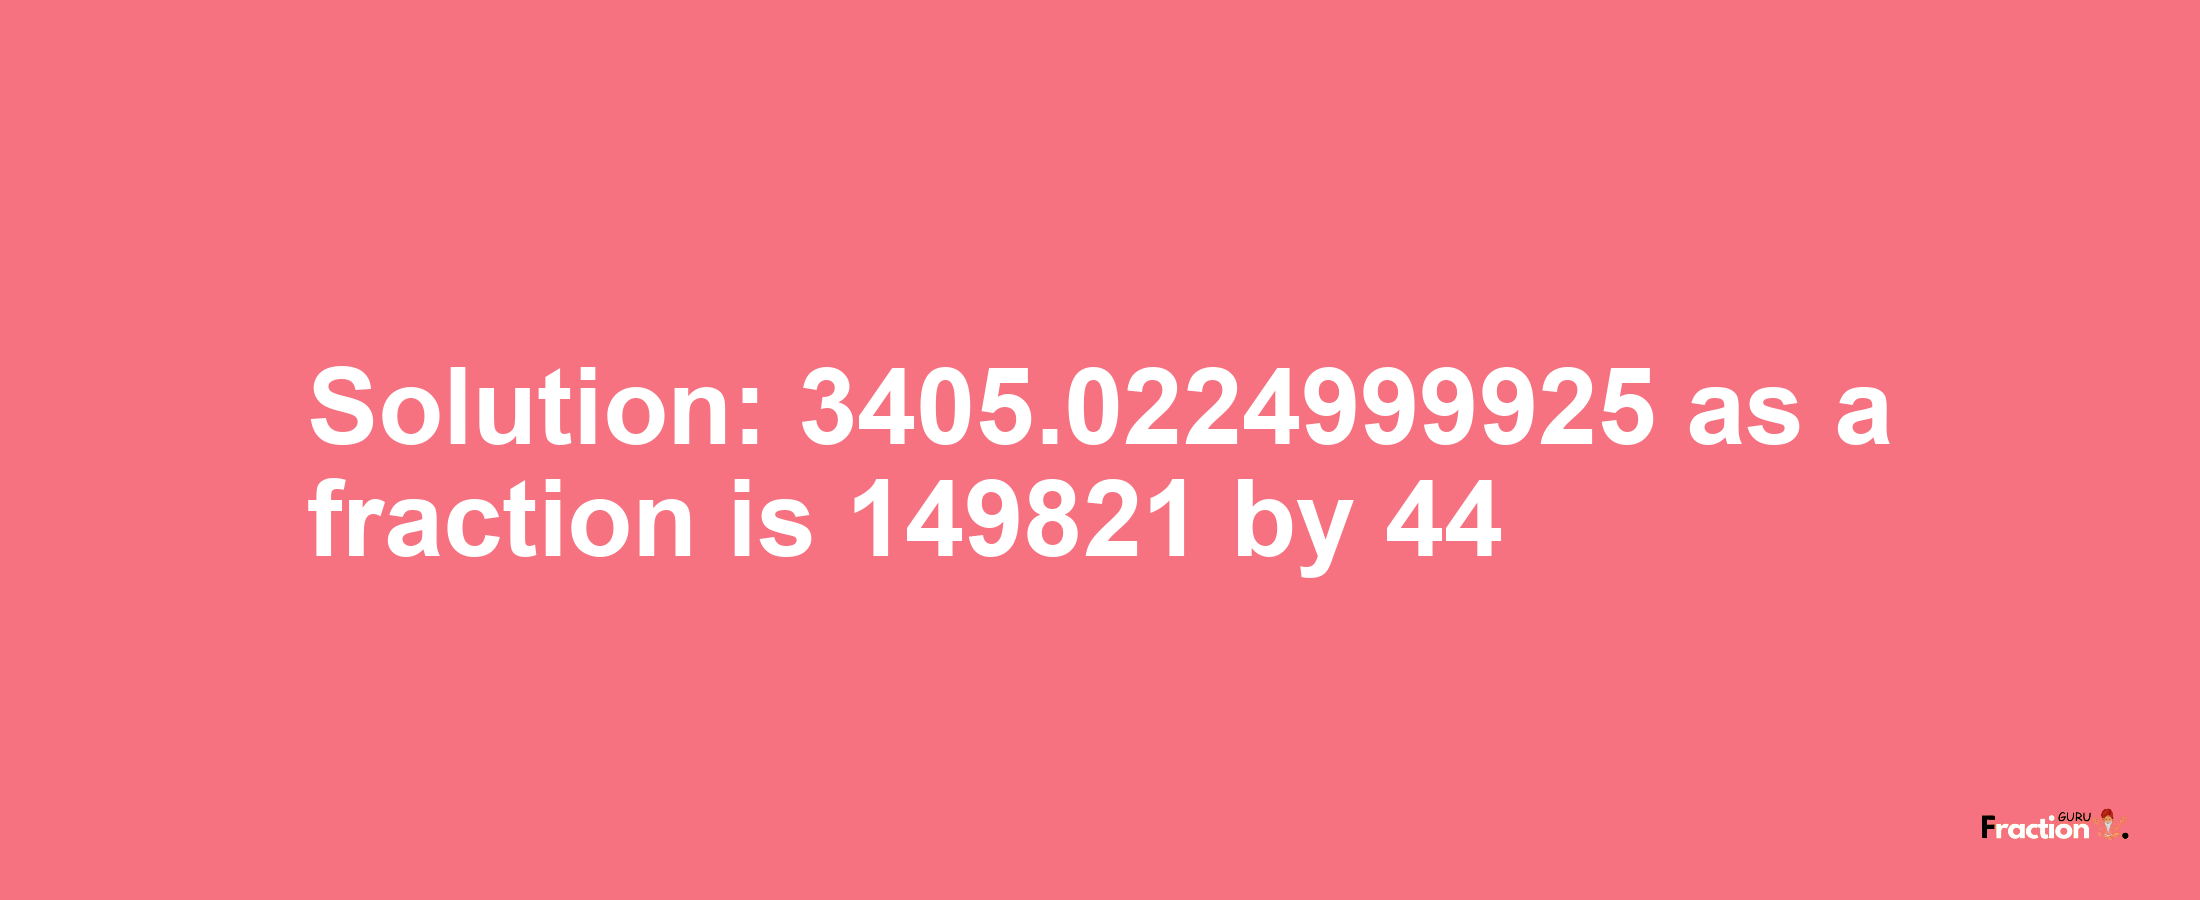 Solution:3405.0224999925 as a fraction is 149821/44